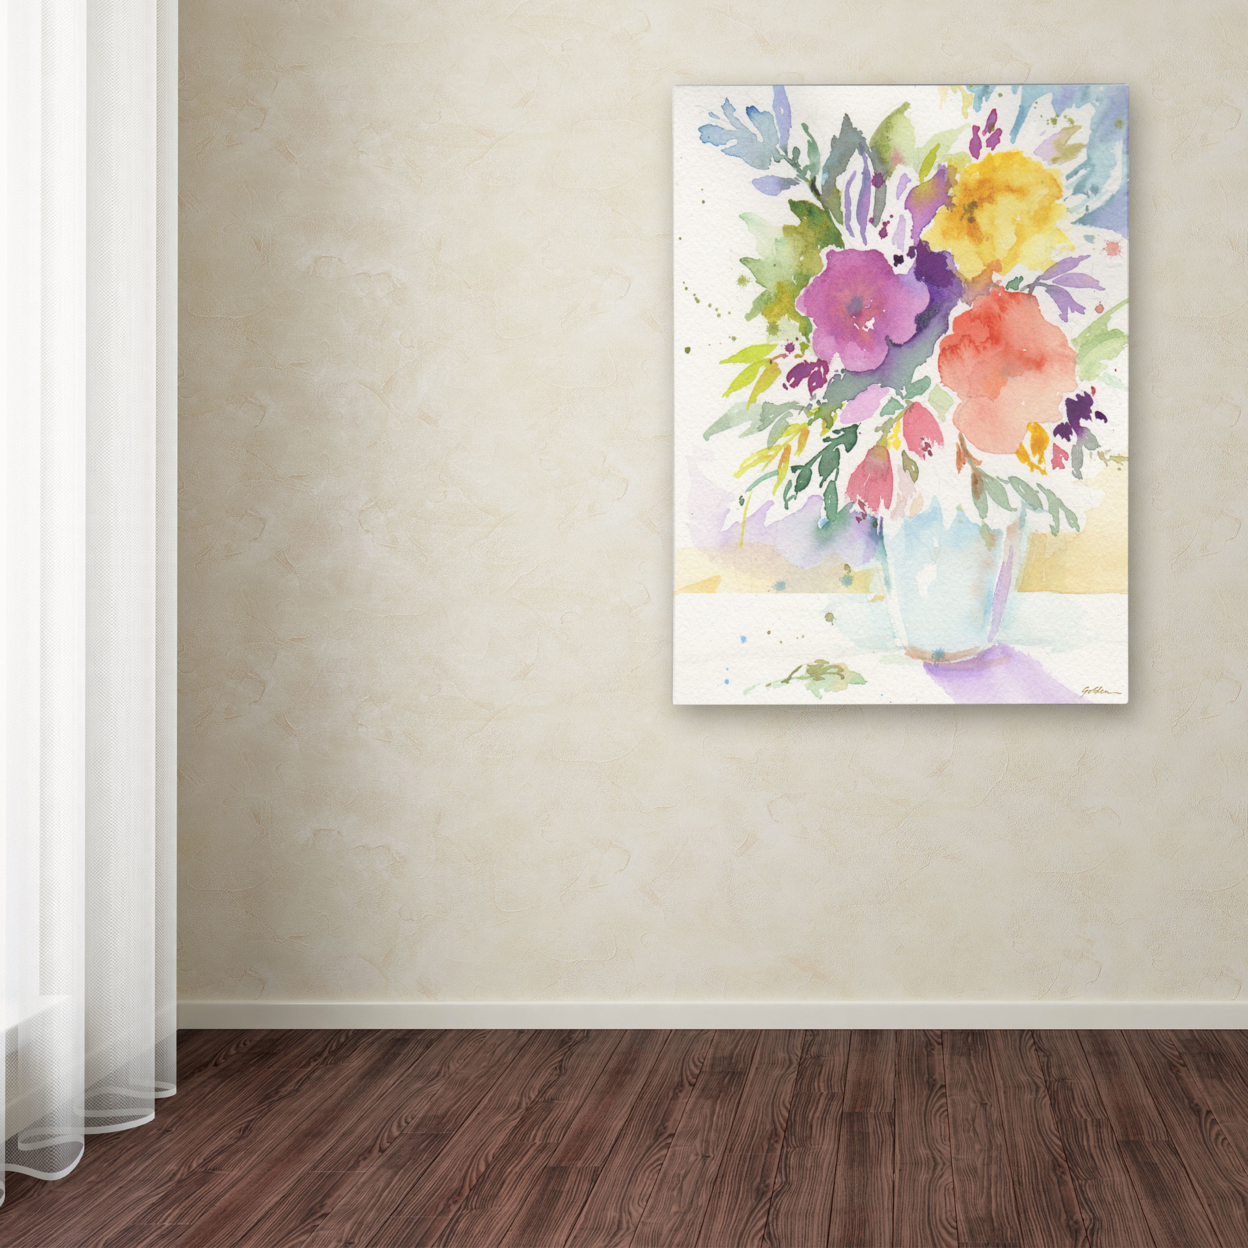 Sheila Golden 'Vase With Bright Blooms' Canvas Art 18 X 24